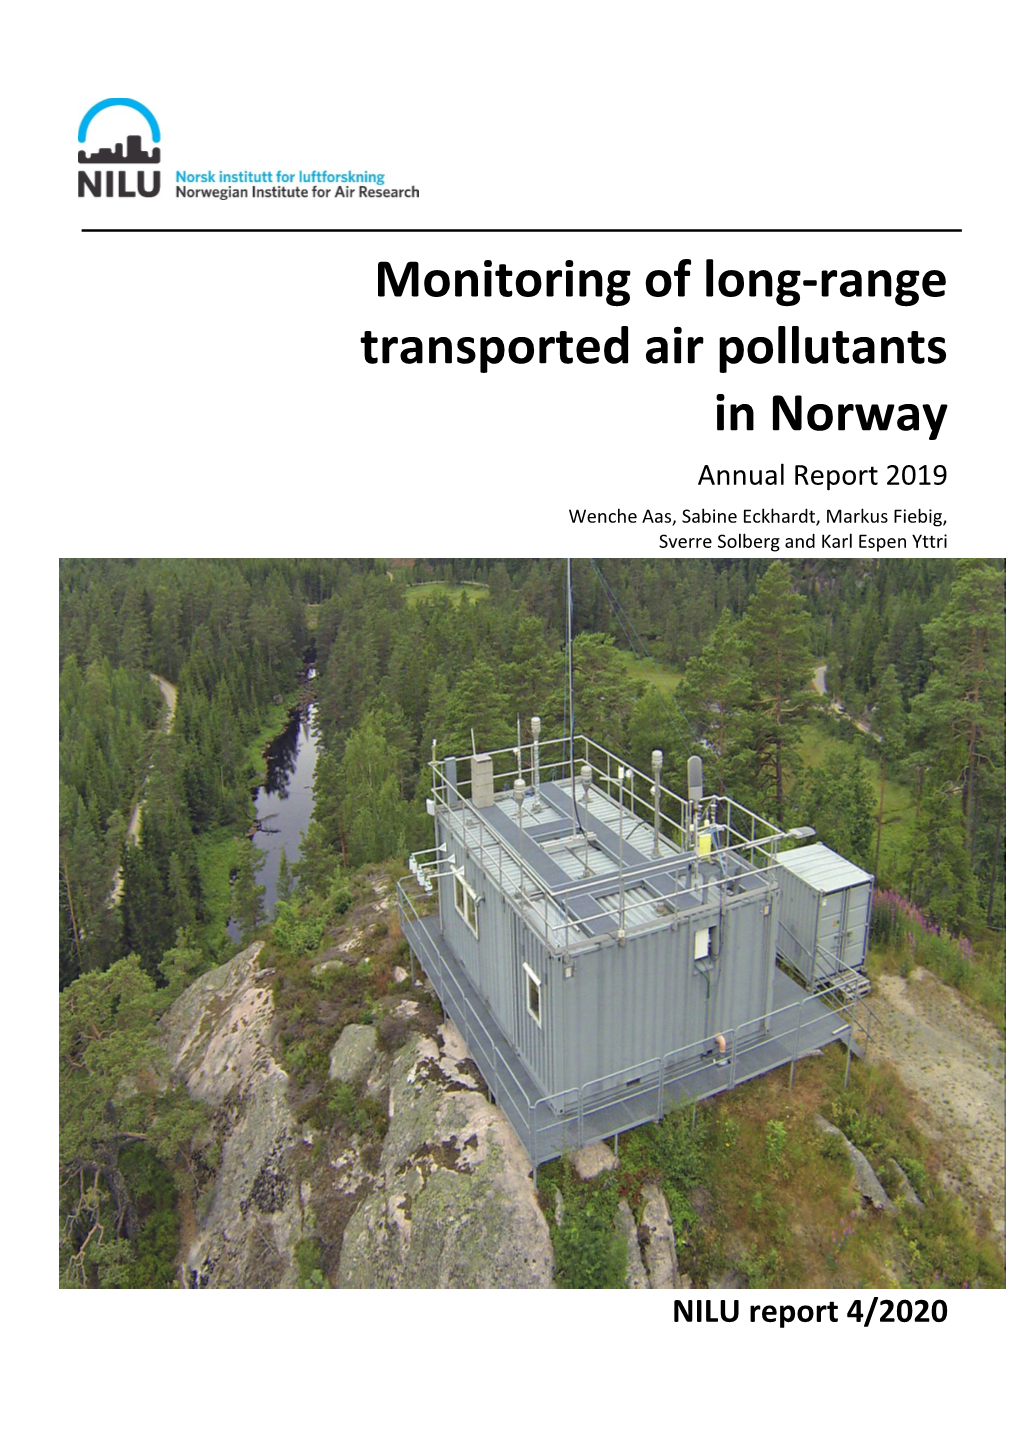 Monitoring of Long-Range Transported Air Pollutants in Norway Annual Report 2019 Wenche Aas, Sabine Eckhardt, Markus Fiebig, Sverre Solberg and Karl Espen Yttri